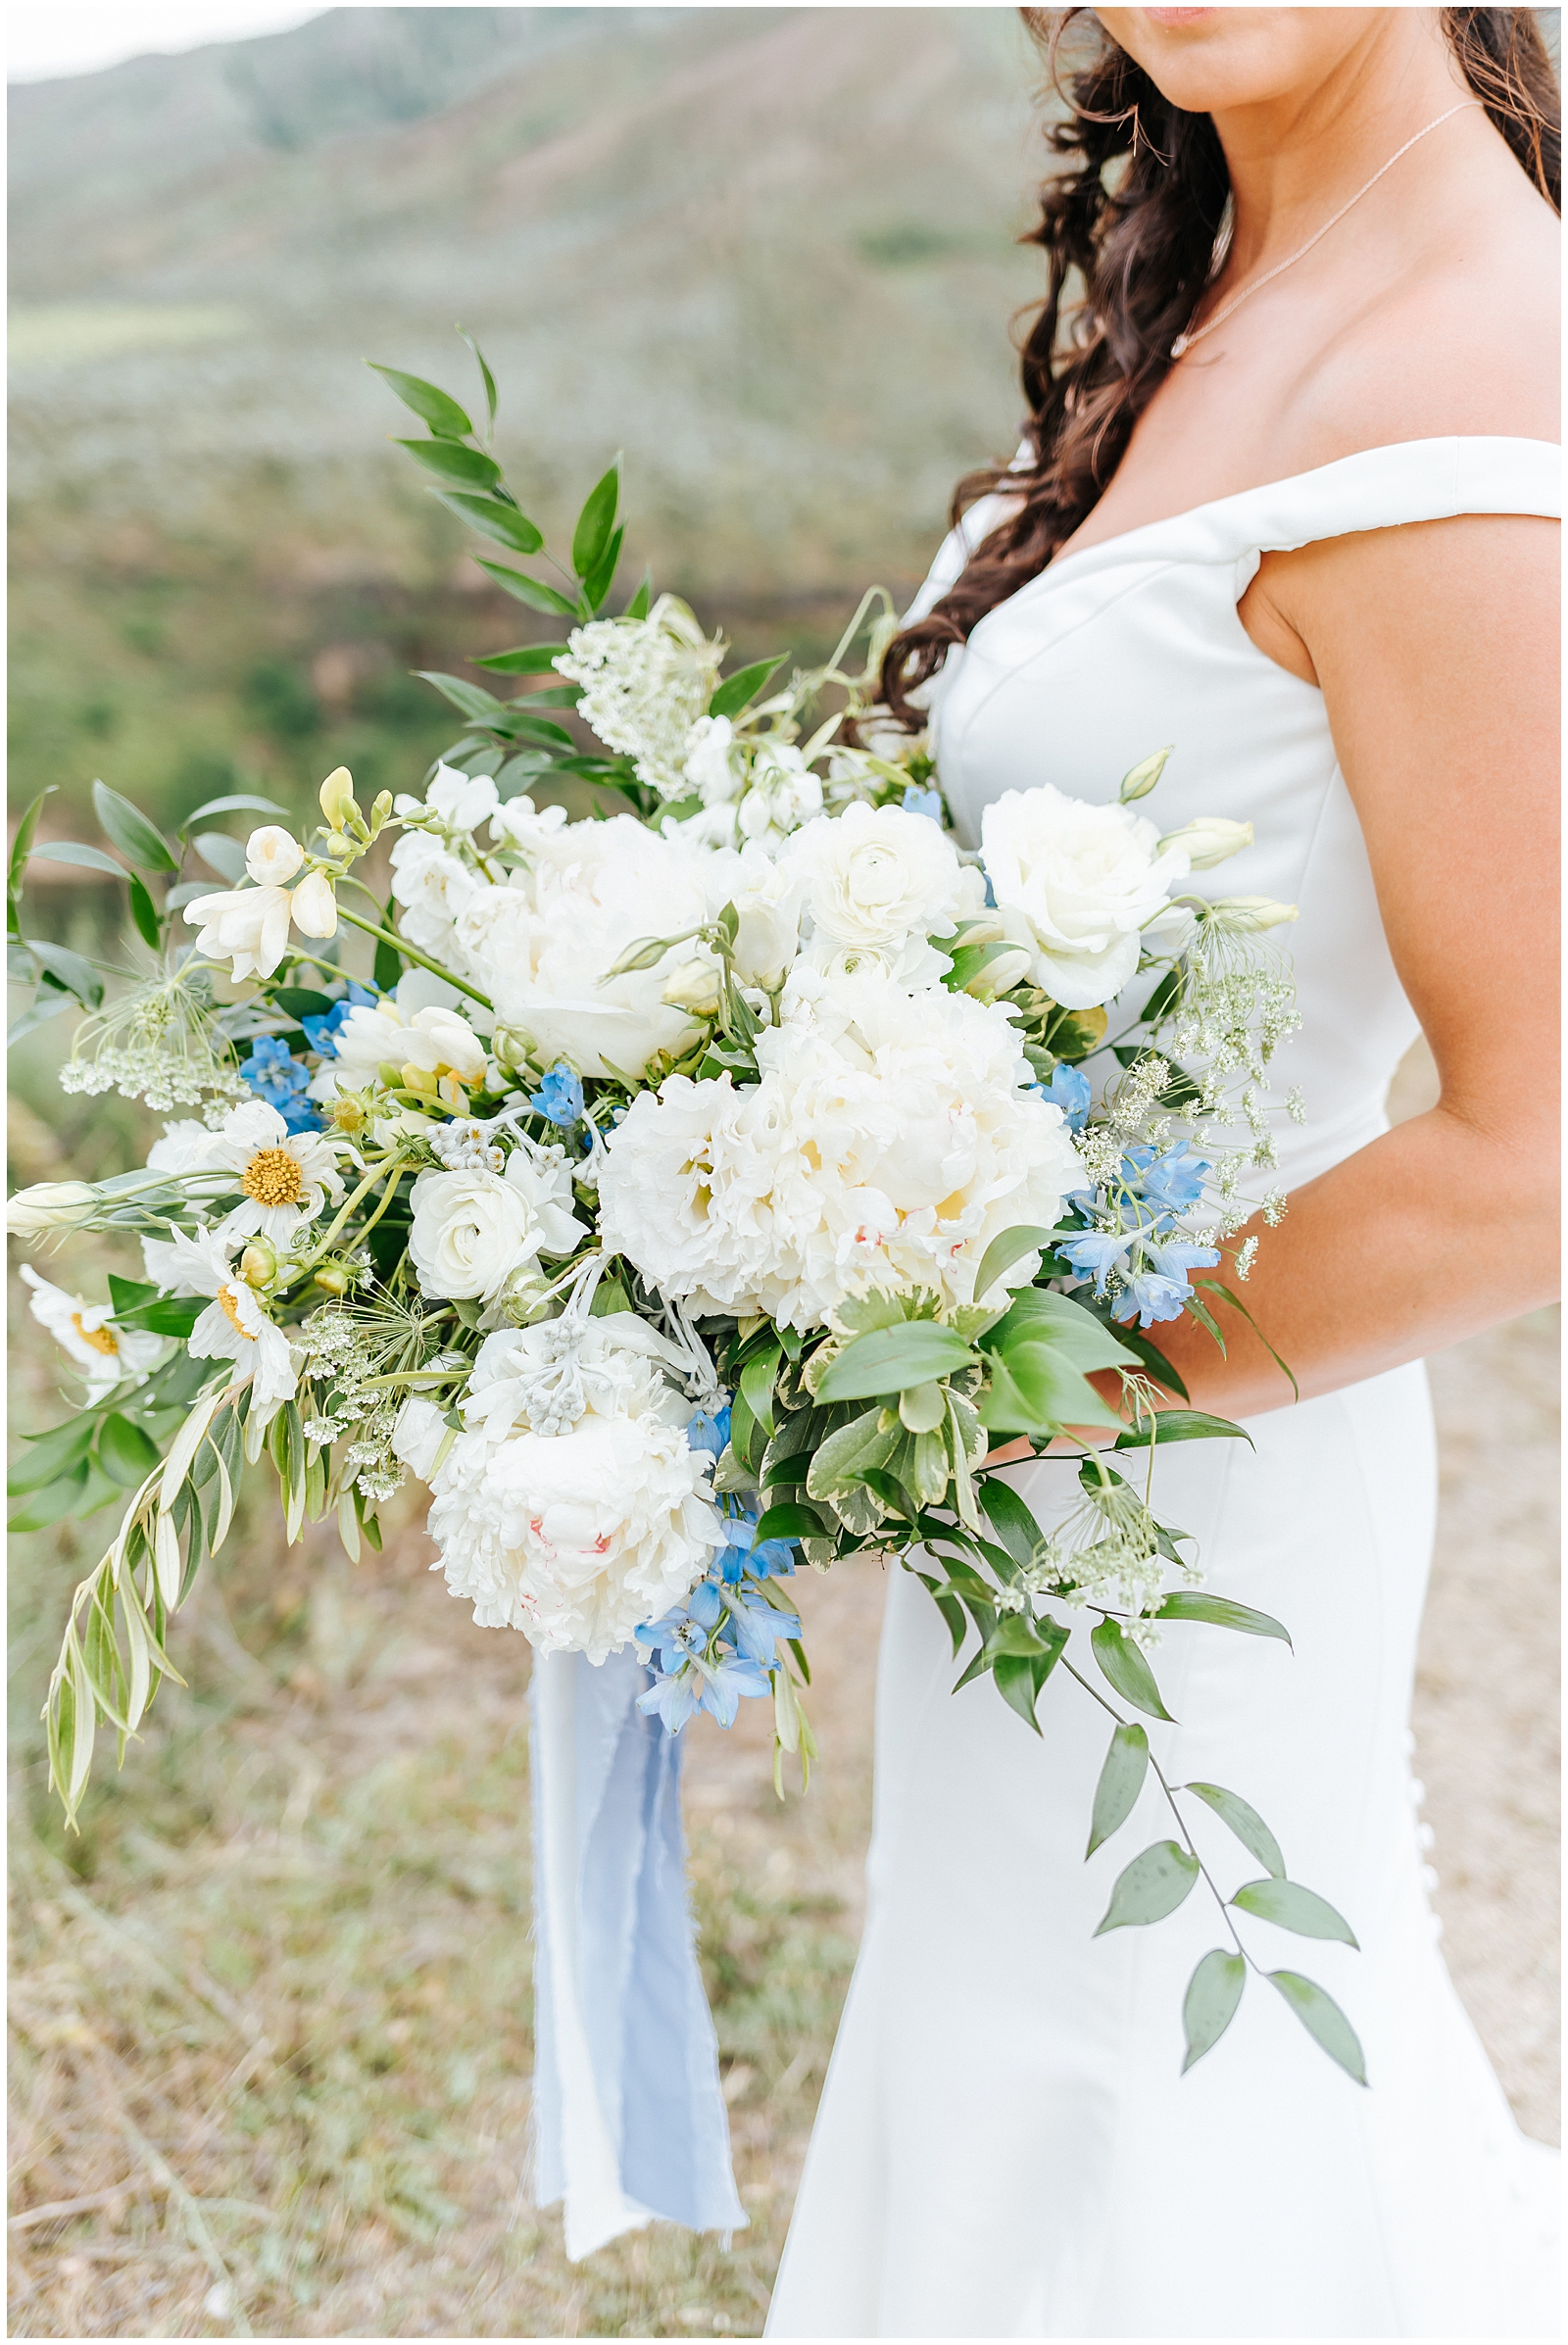 Gorgeous Large Bridal Bouquet with White and hints of Dusty Blue by Petal Works Design